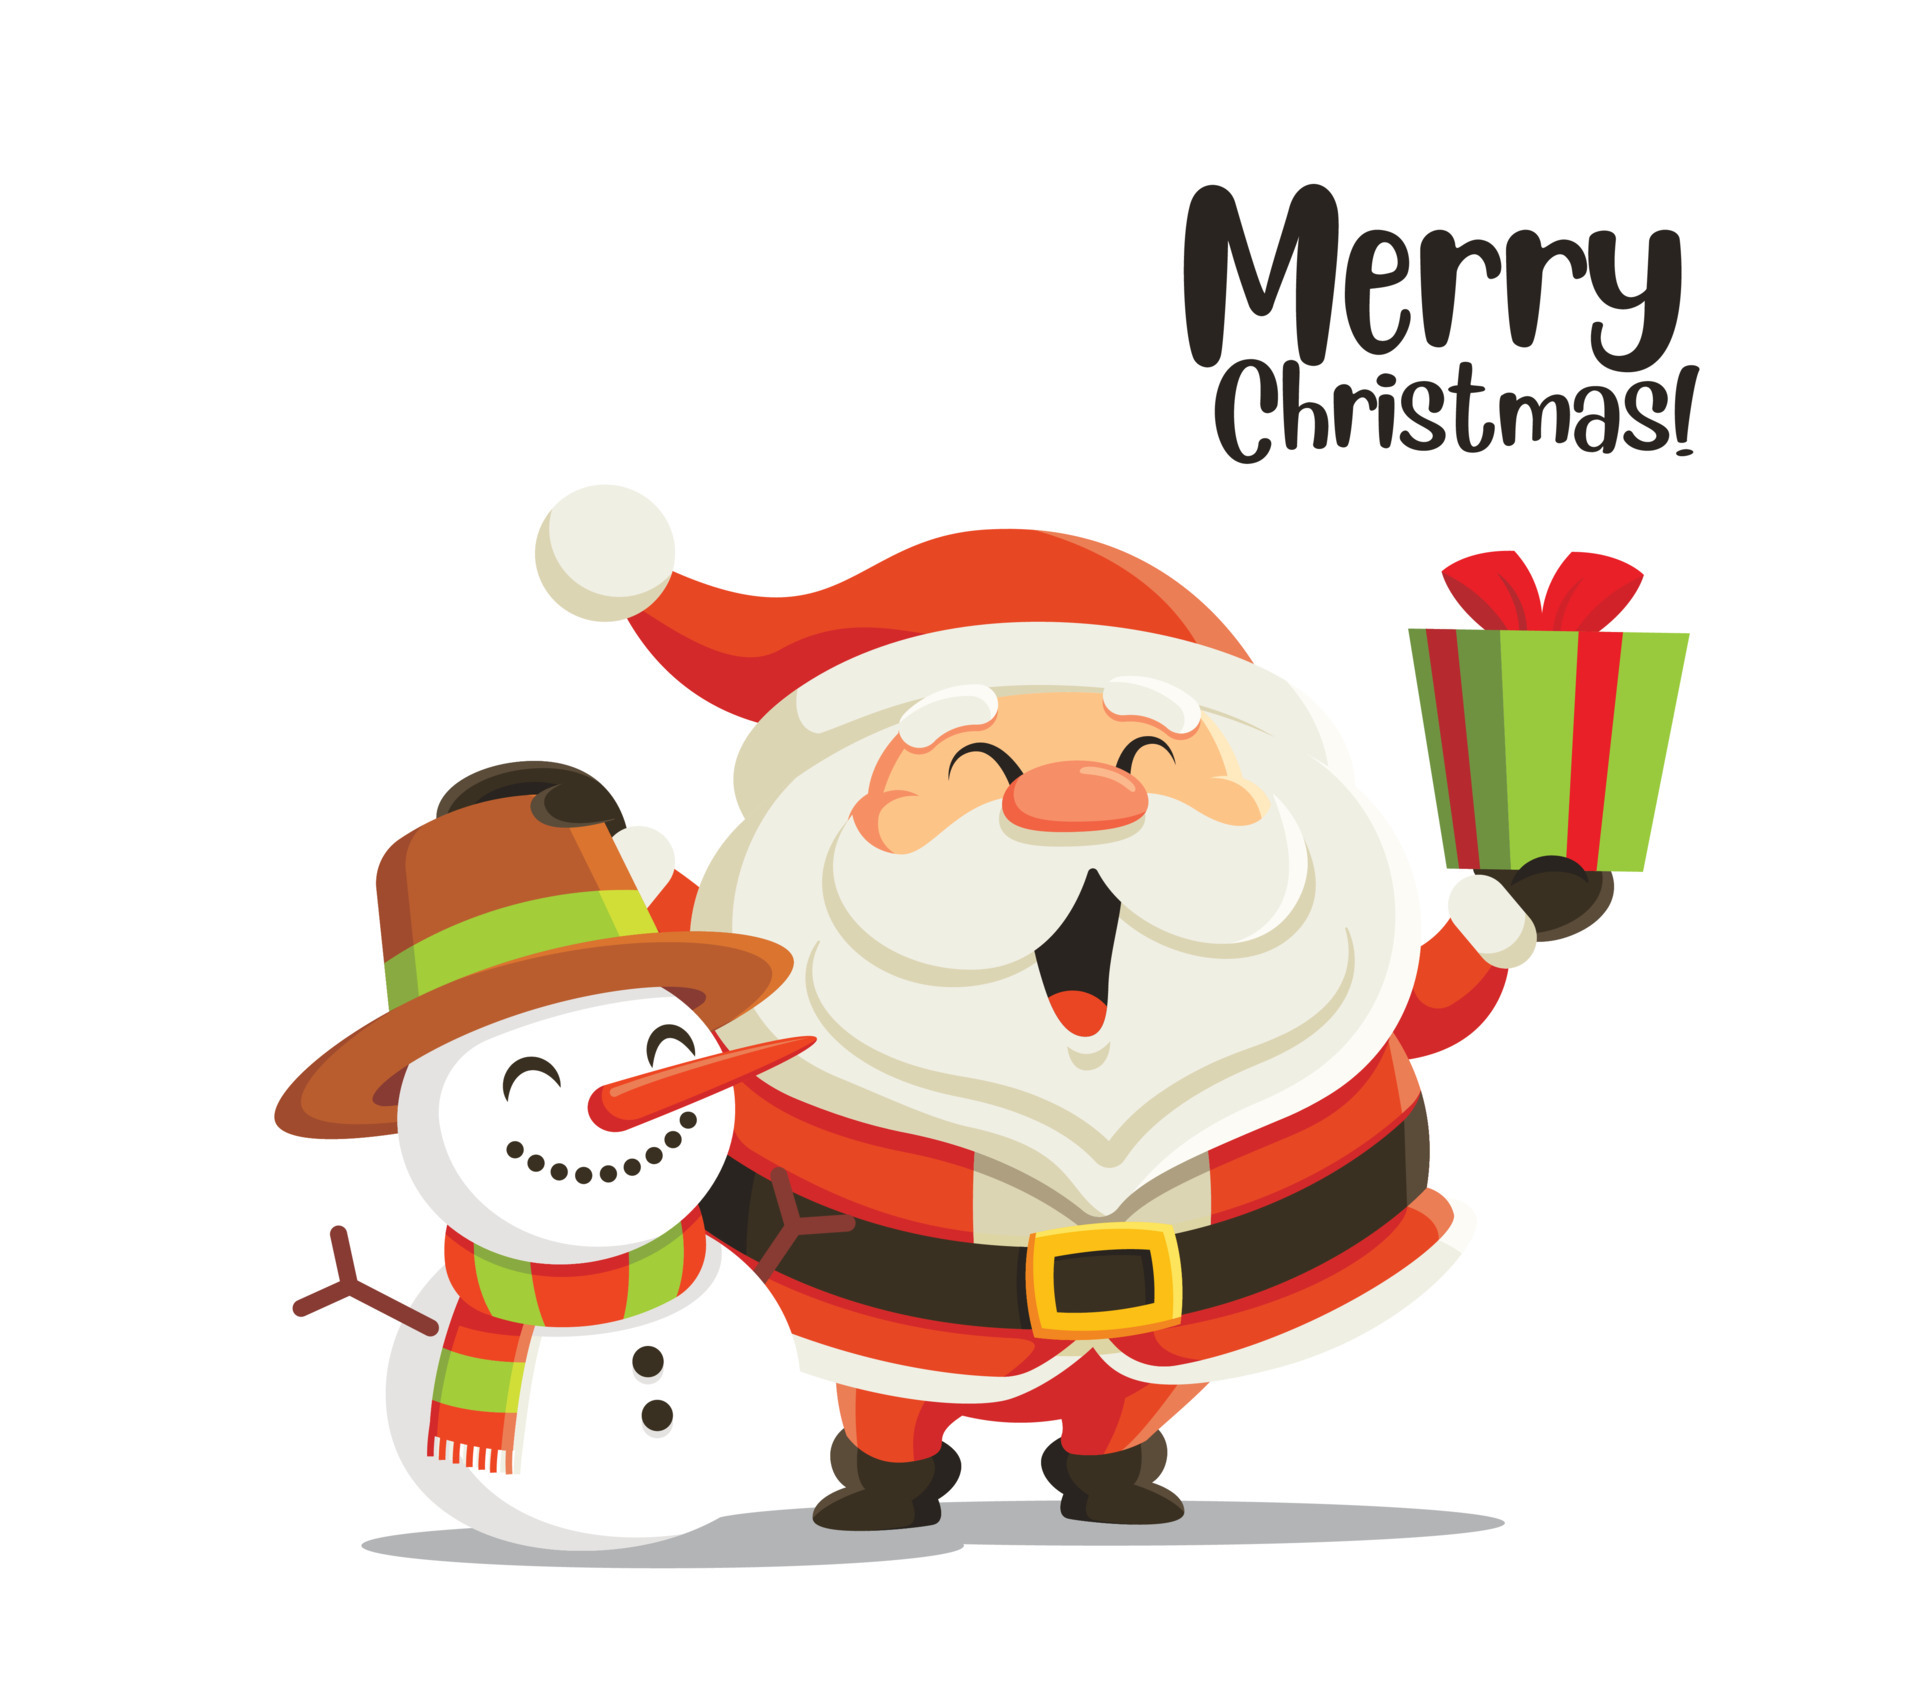 Merry Christmas and Happy New Year. Cute cartoon Santa Claus holding  Christmas present and hand touch on snowman head. Holiday greeting card  Santa Claus and snowman. Merry Christmas lettering 4397749 Vector Art